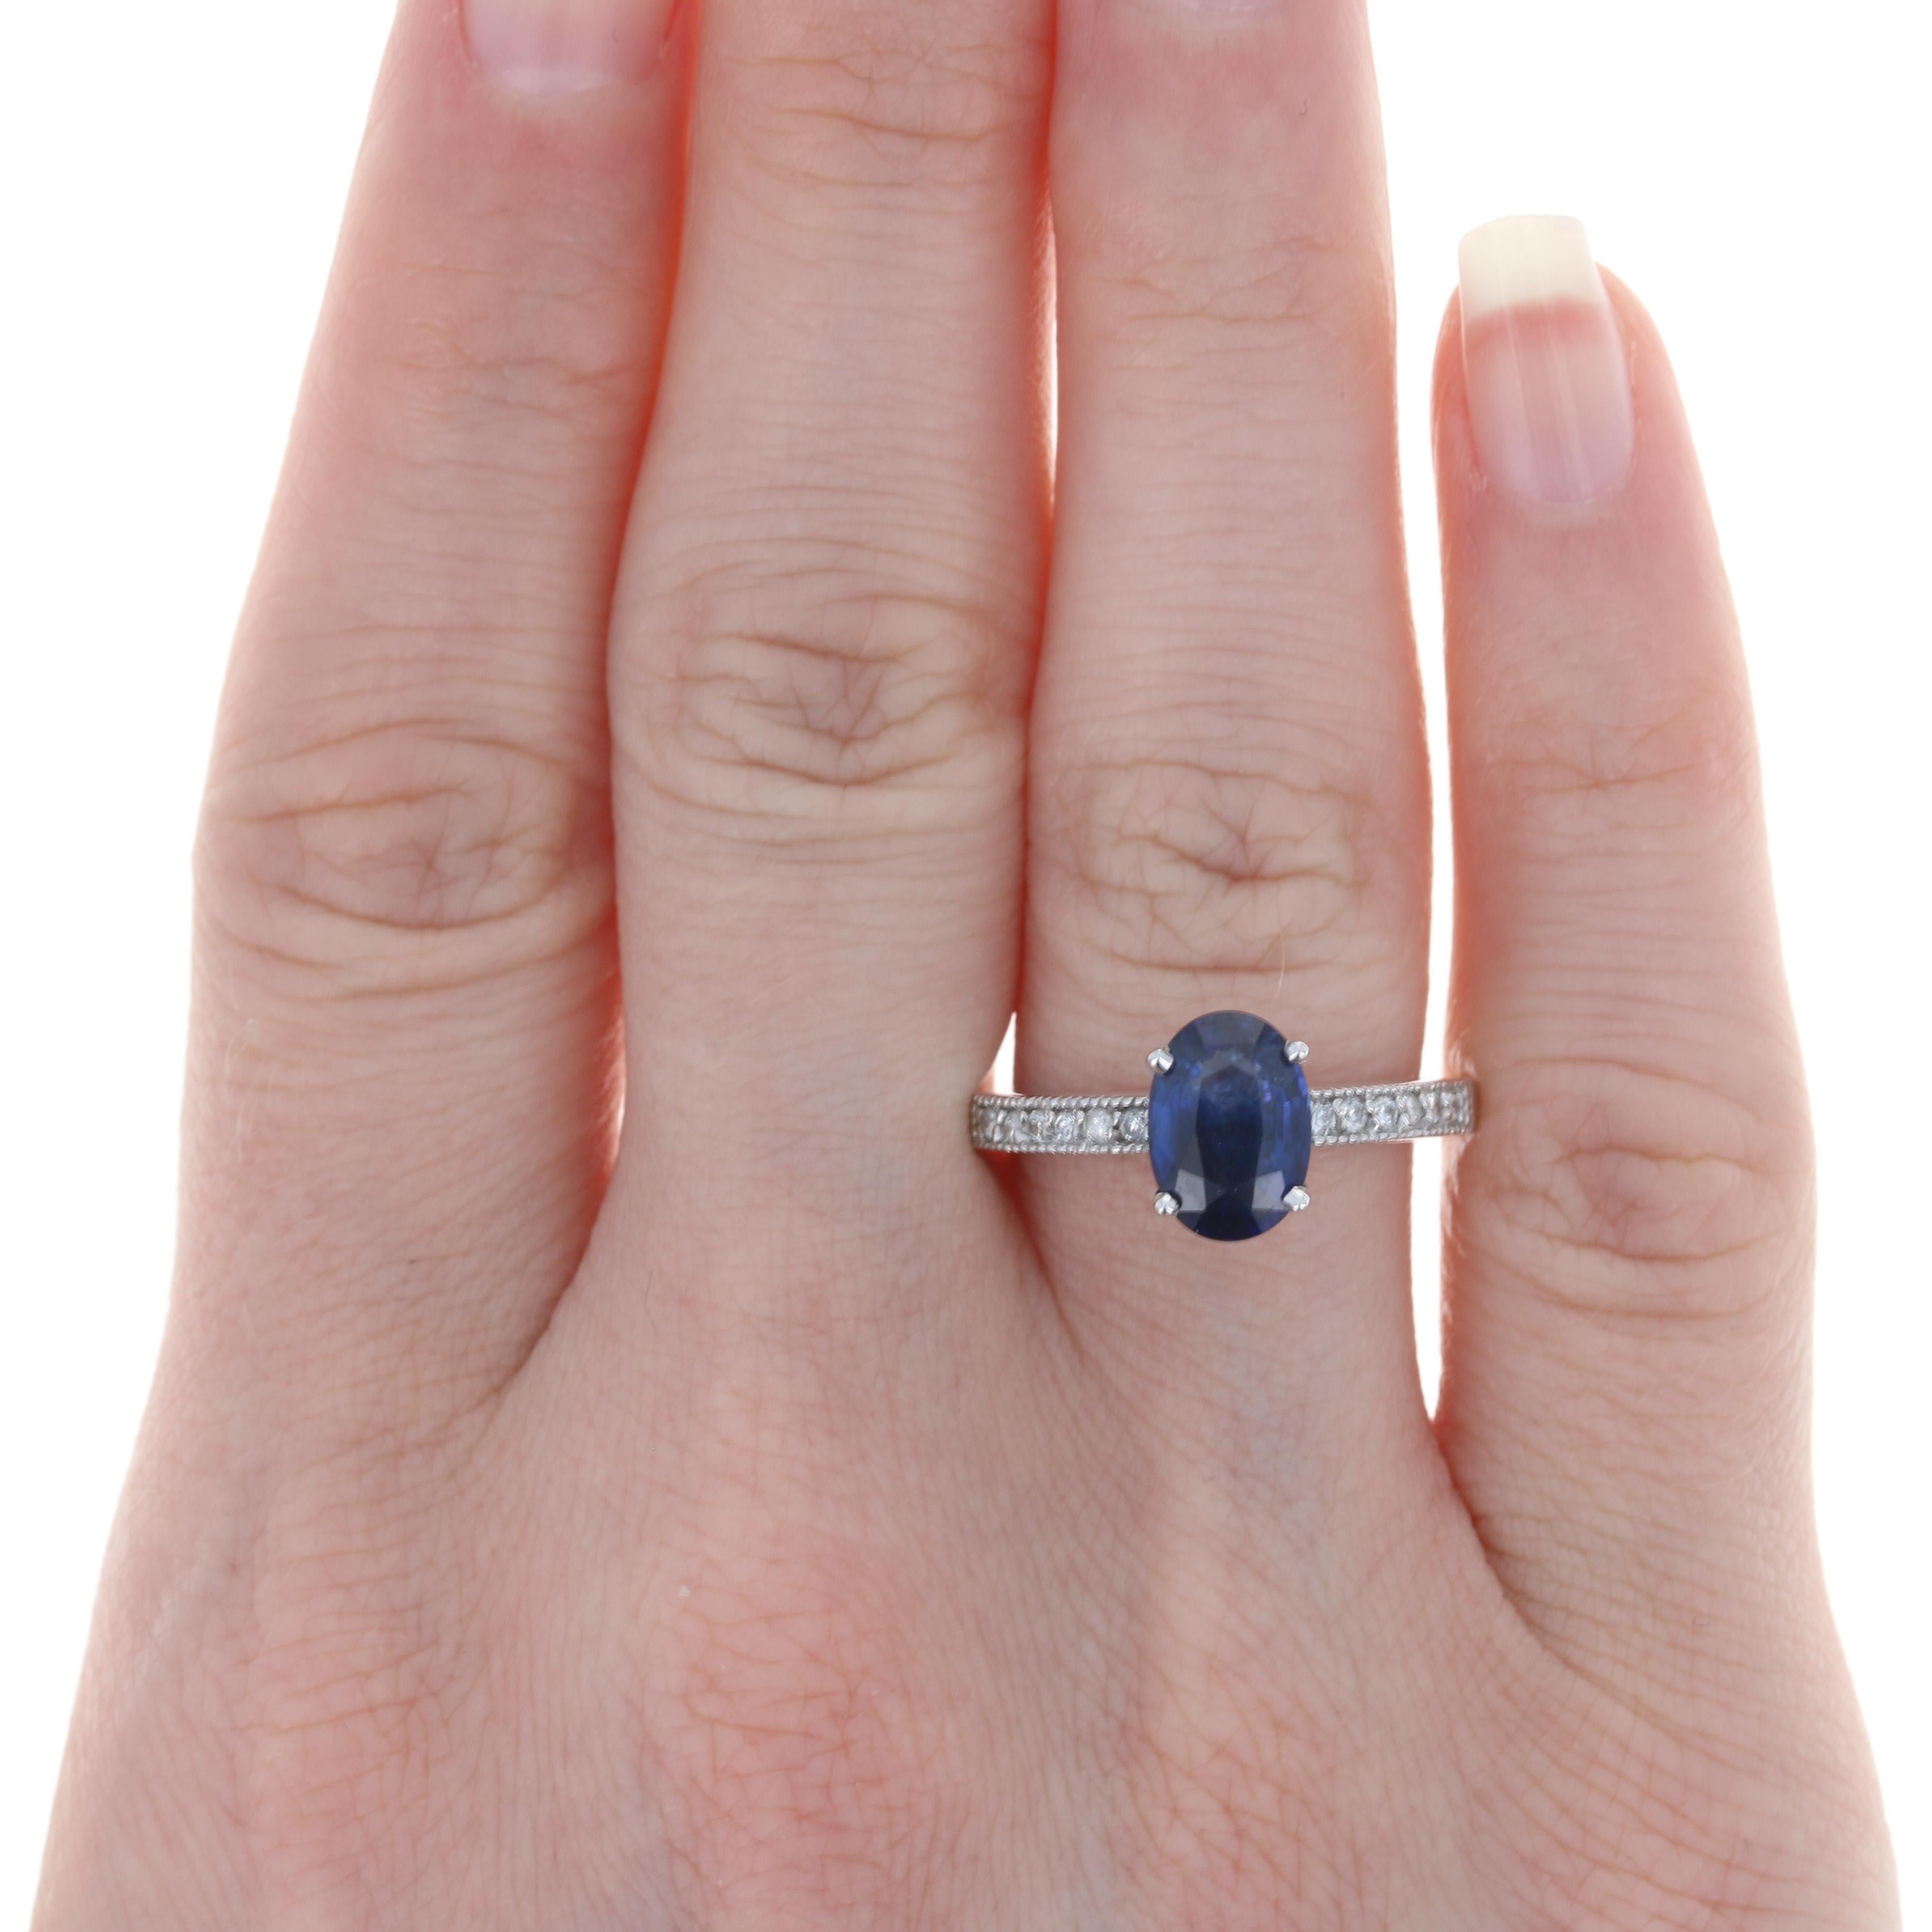 Size: 6 1/2
 Sizing Fee: Up 2 sizes for $30 or Down 1 size for $25
 
 Metal Content: 14k White Gold
 
 Stone Information: 
 Genuine Sapphire
 Treatment: Heating
 Carat: 2.37ct
 Cut: Oval
 Color: Blue 
 Size: 9.3mm x 6.6mm
 
 Natural Diamonds
